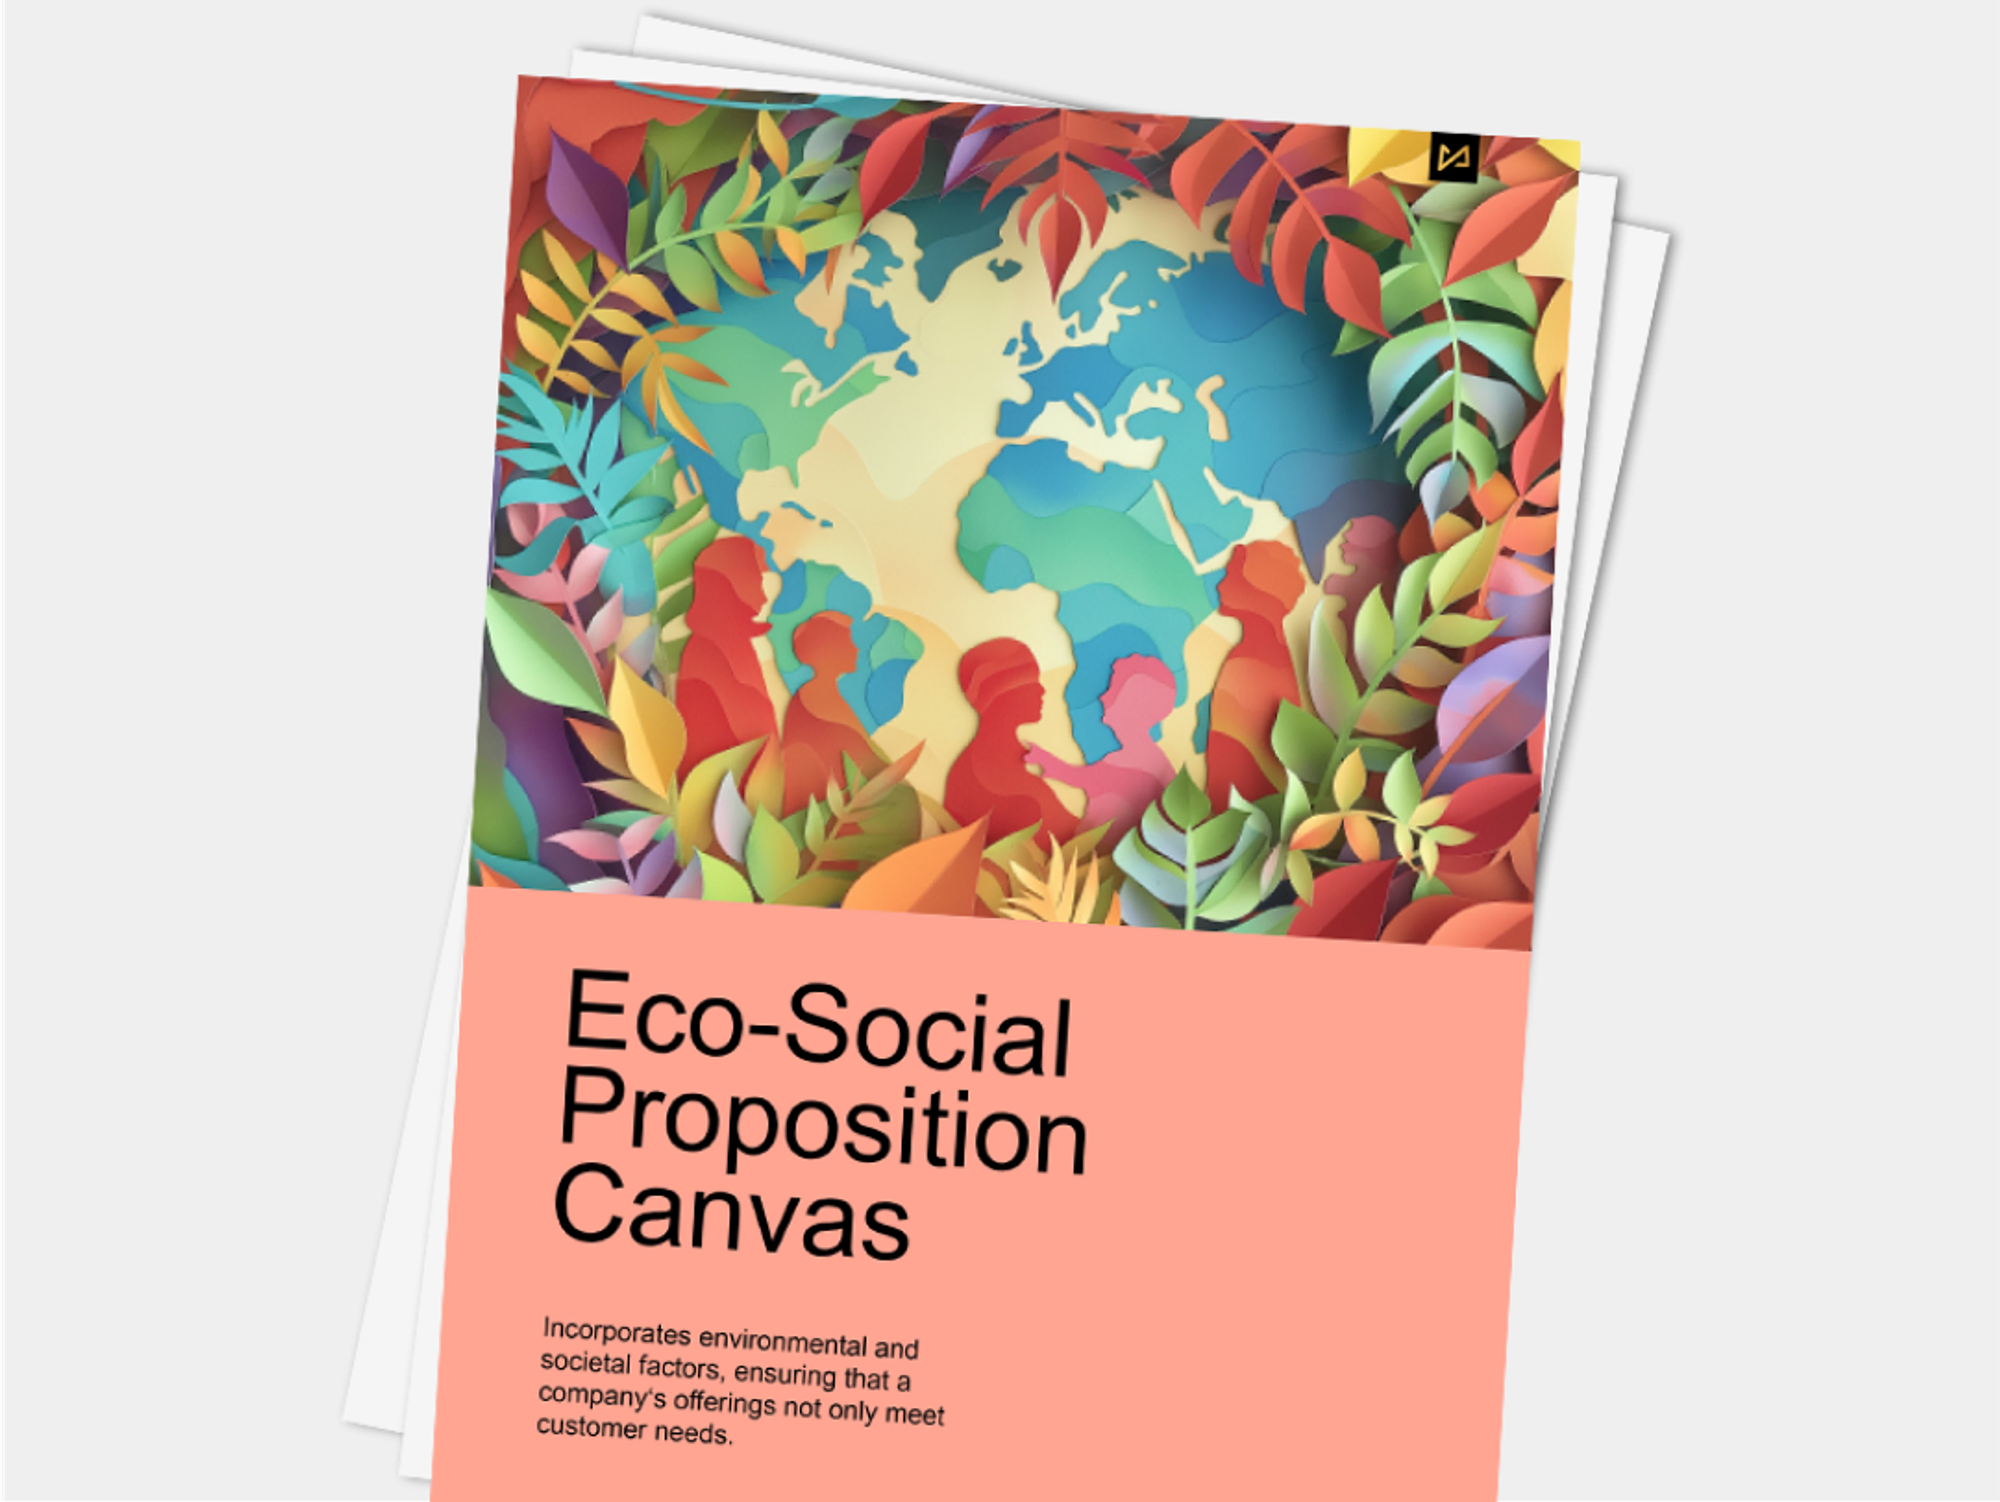 Booklet with "Eco-Social Proposition Canvas " on its cover